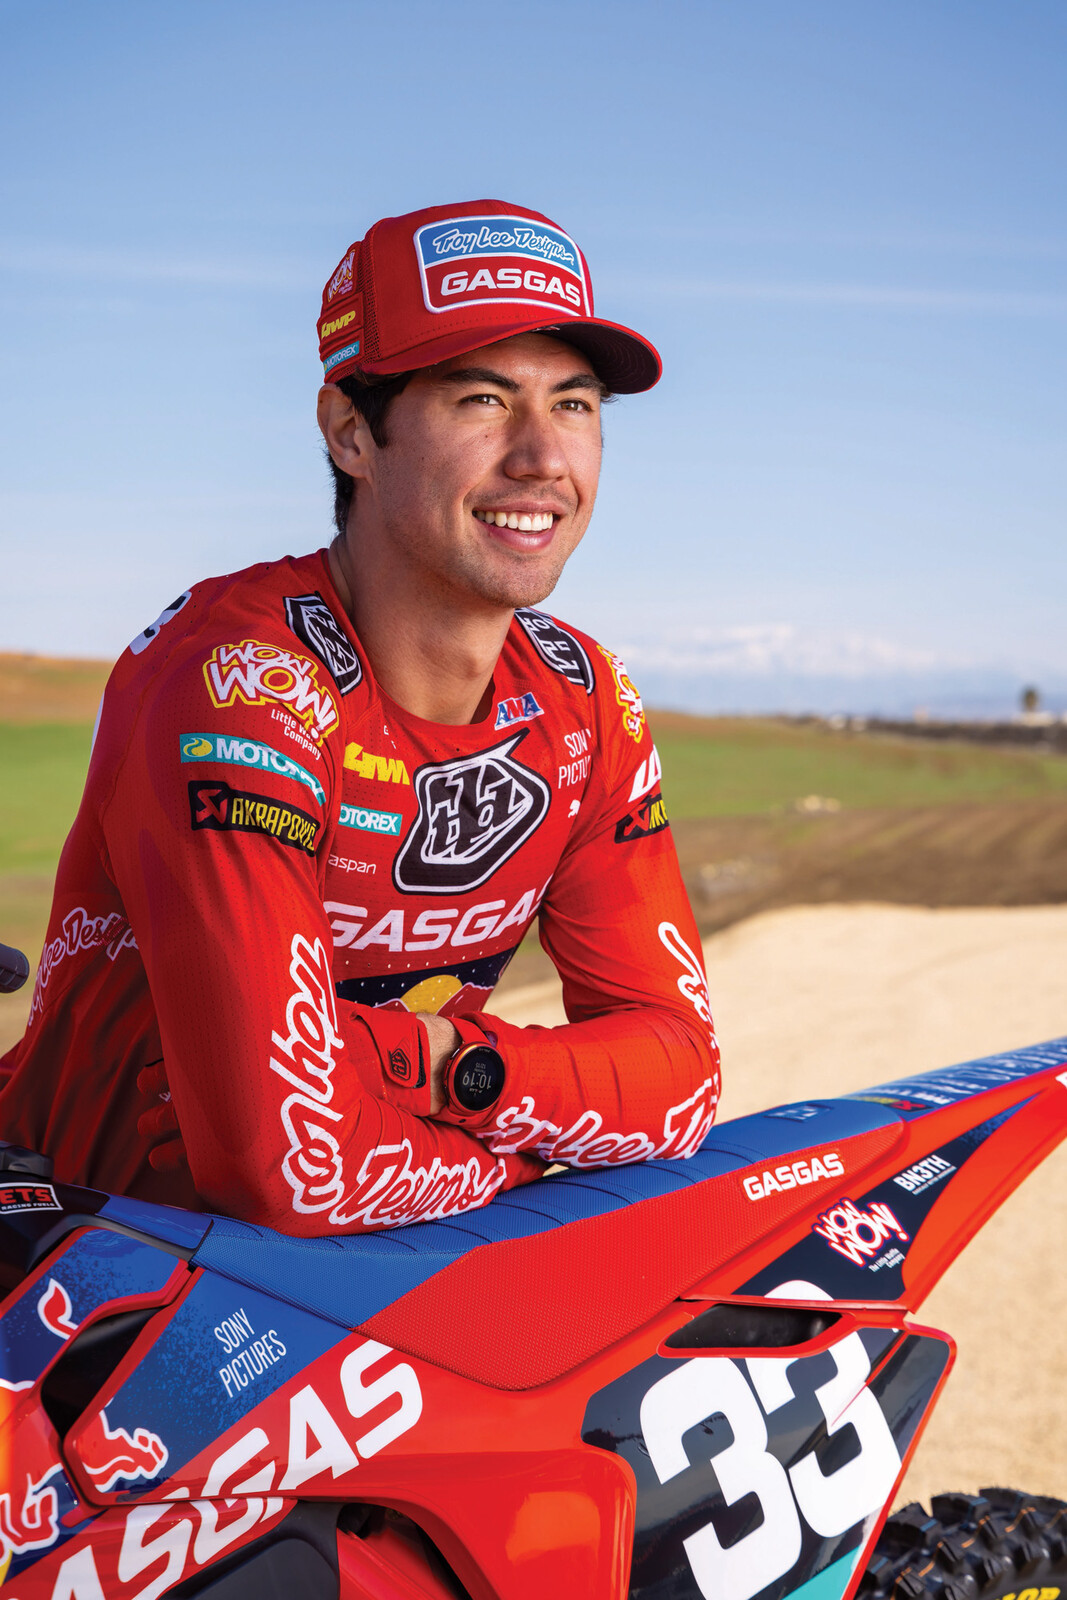 Troy Lee Designs/Red Bull/GasGas Announces 2023 Roster, Personnel Changes -  Racer X